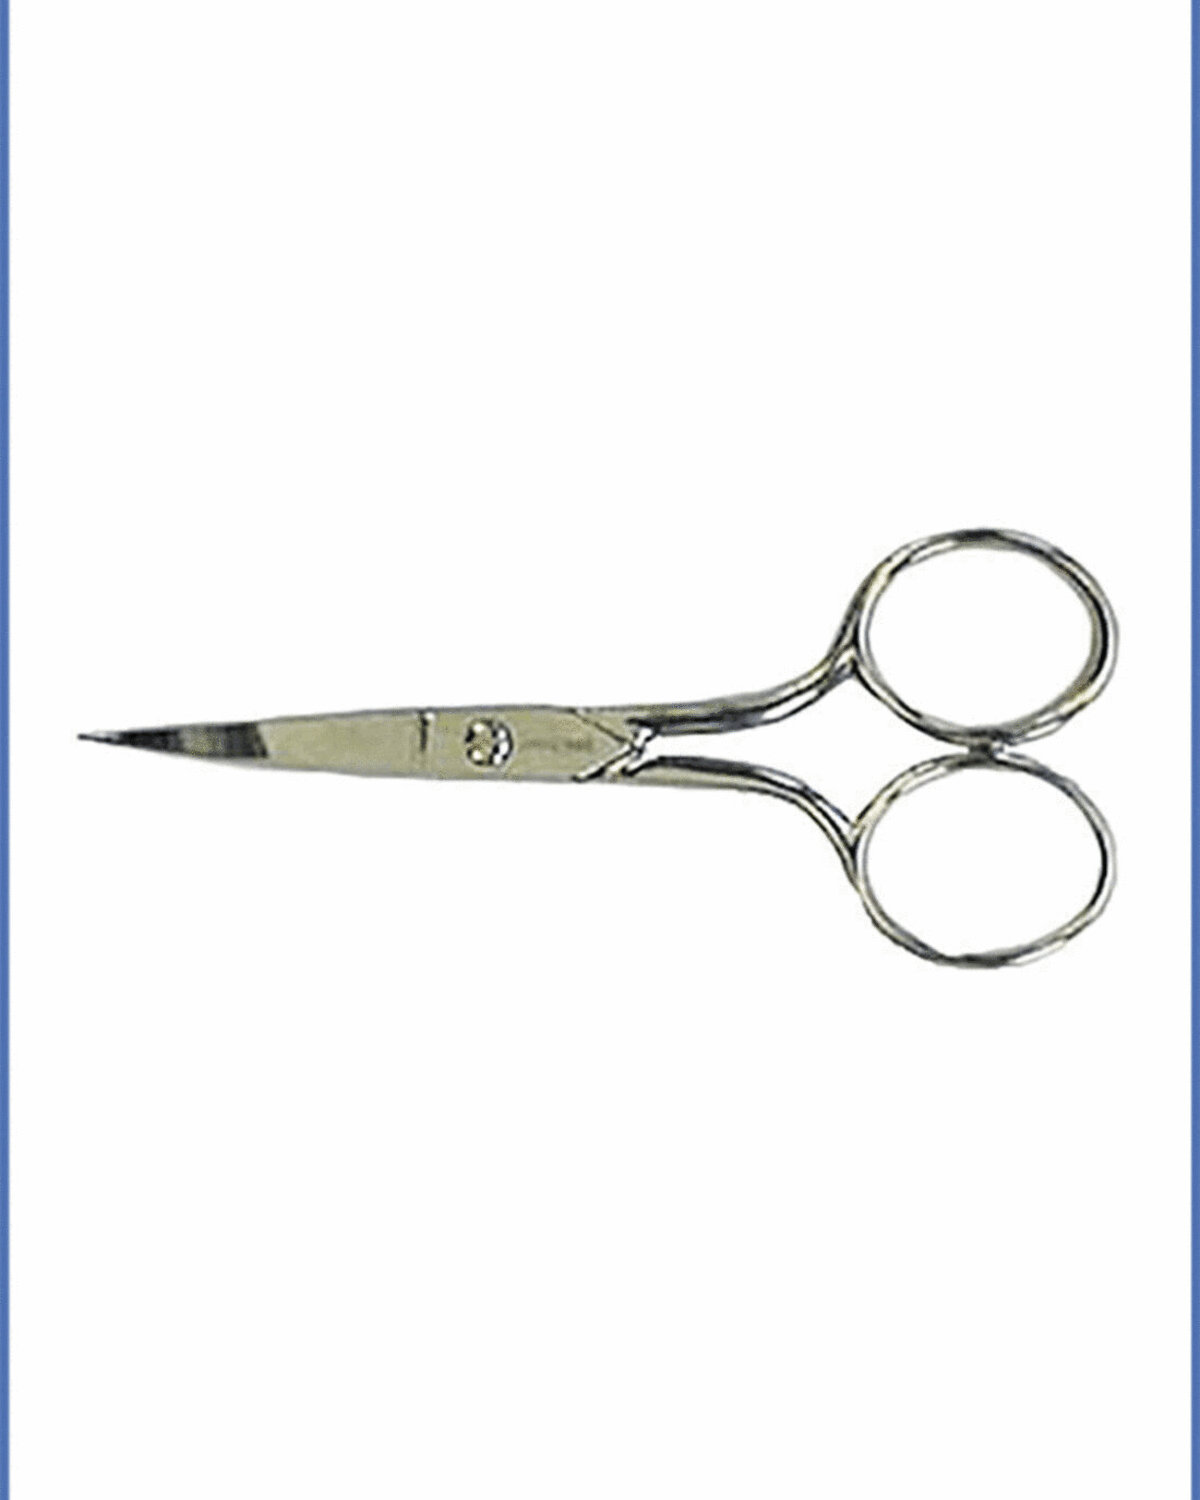 CURVED EMBROIDERY SCISSORS EXAGERATED CURVED POINT